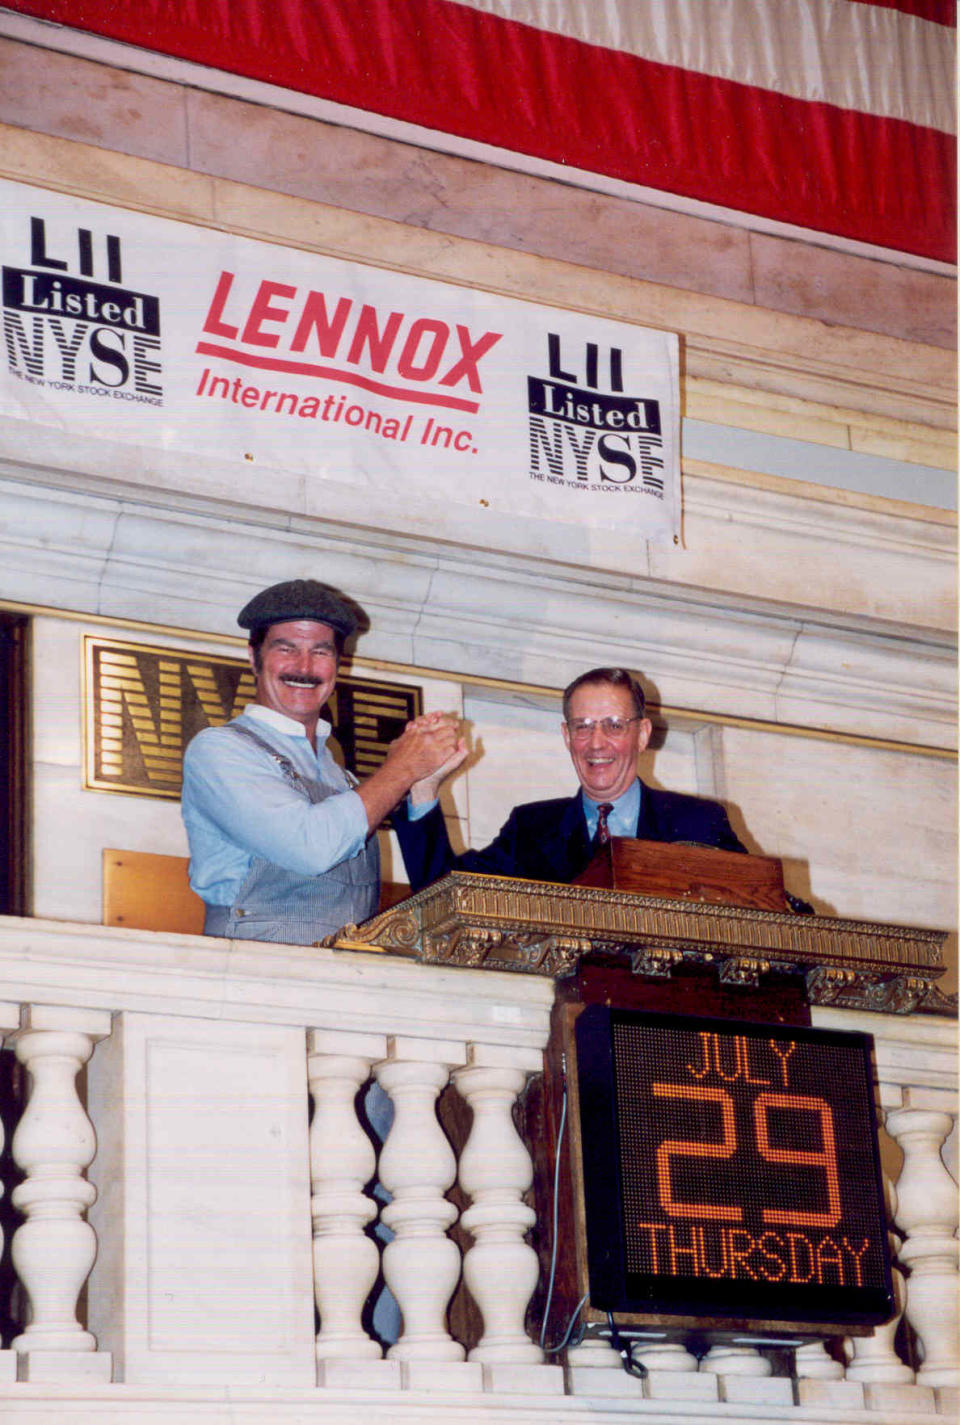 John W. Norris Jr. (right) with the iconic character Dave (Attaboy Dave!) Lennox at the opening bell of the New York Stock Exchange when the company first became publicly traded in 1998. The popular image of Dave Lennox became the company's symbol for over 40 years.